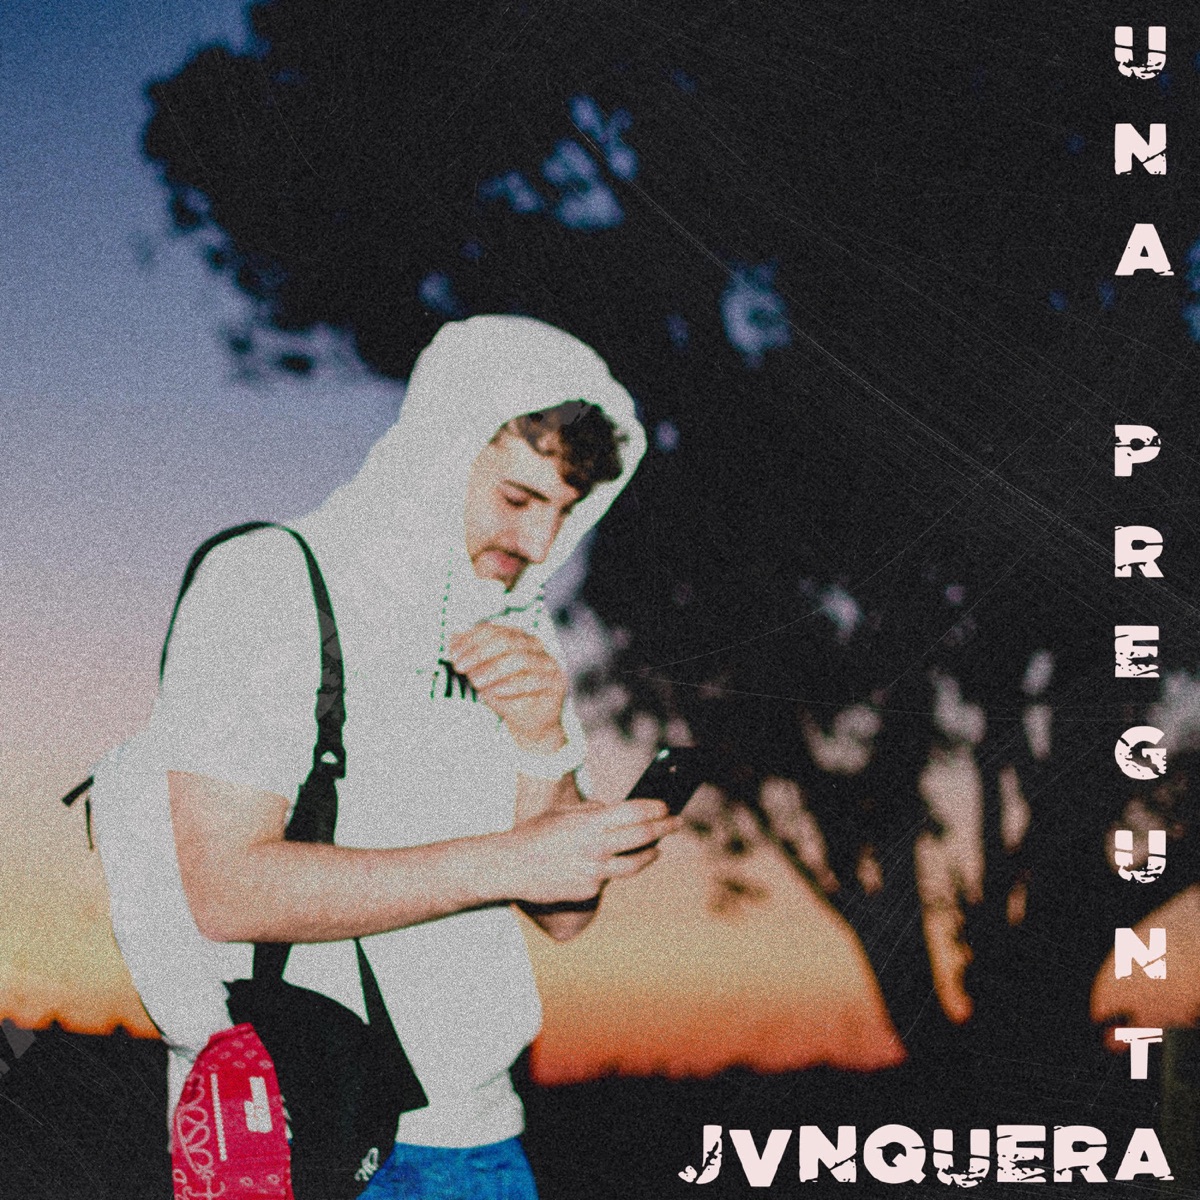 Xeques (feat. Jay Vázquez, Bad Fifty, N-Jey, Papi Paler, Itsmustanigga, π  Beats & La Visión) – Song by Jvnquera – Apple Music